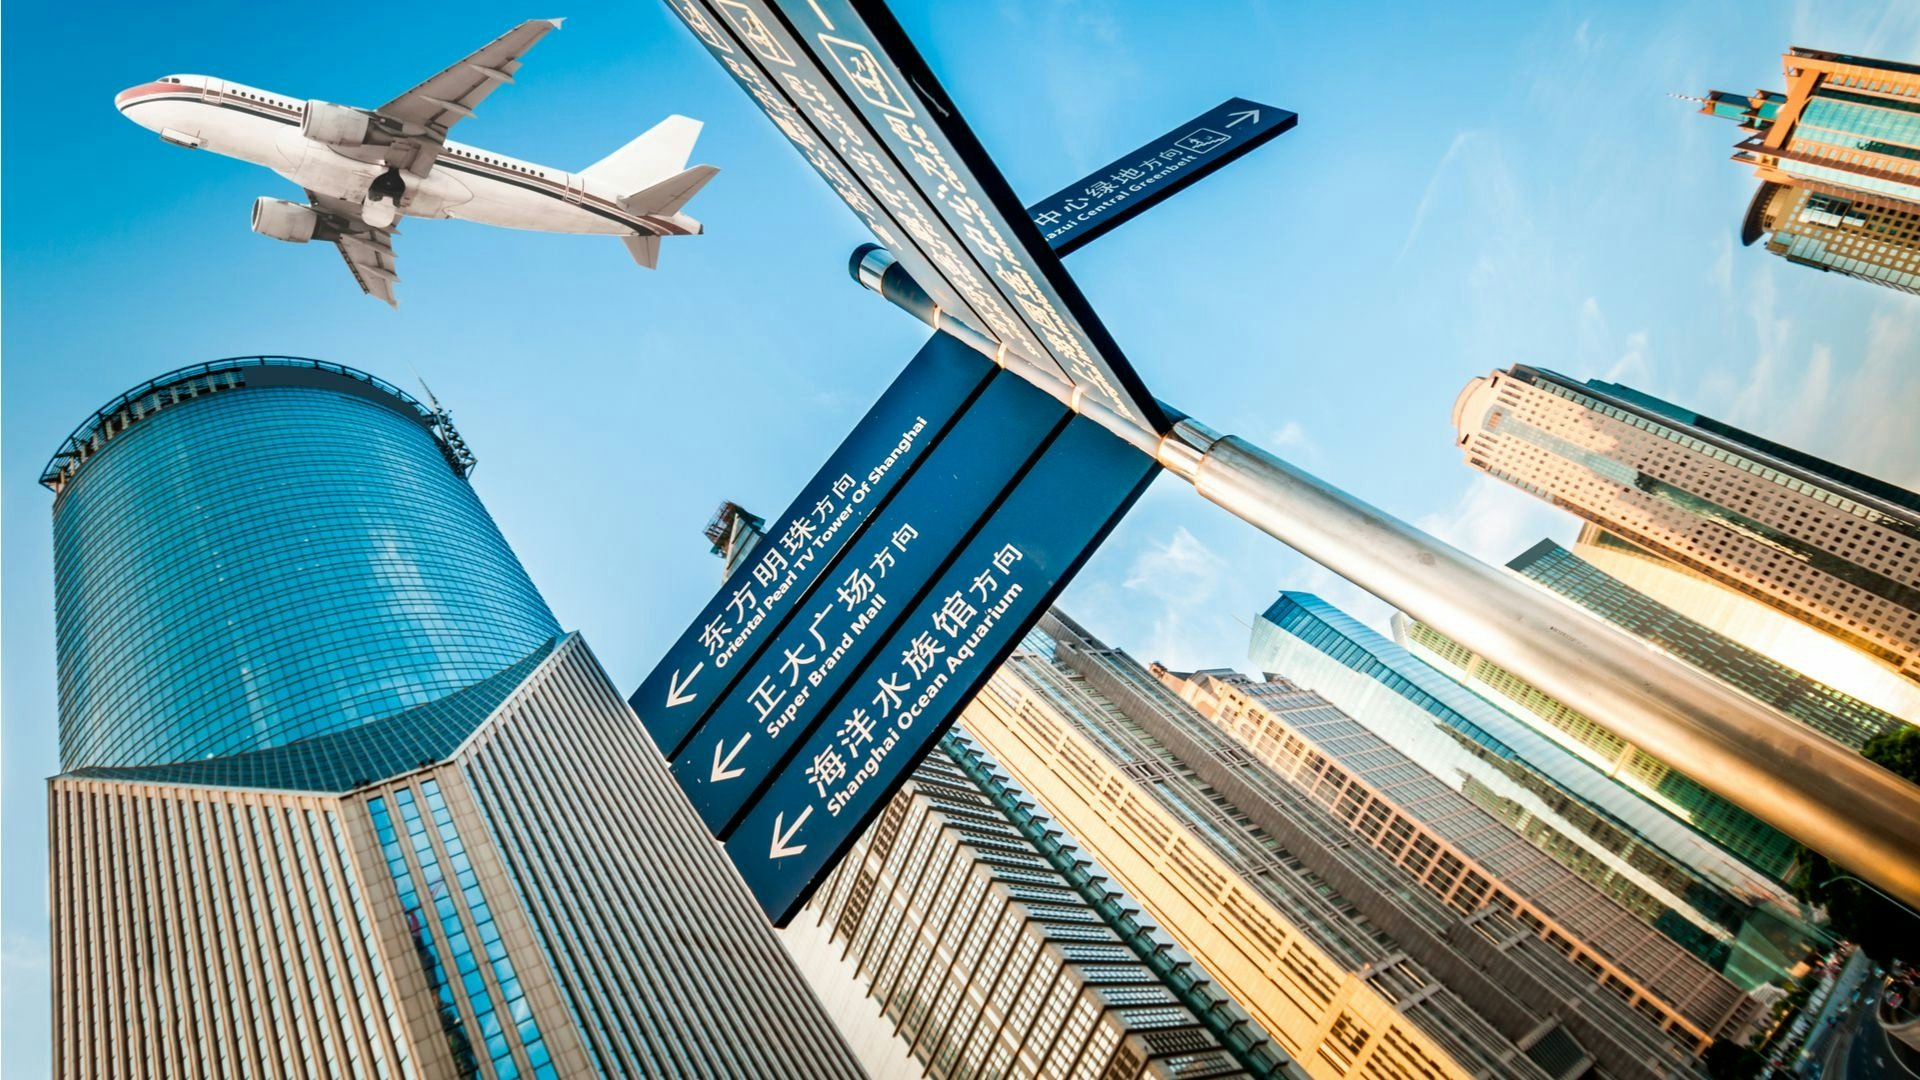 Trinity Forum 2018 in Shanghai hosted a group of industry experts who shared their insights on the future of travel retail sector. Photo: Shutterstock